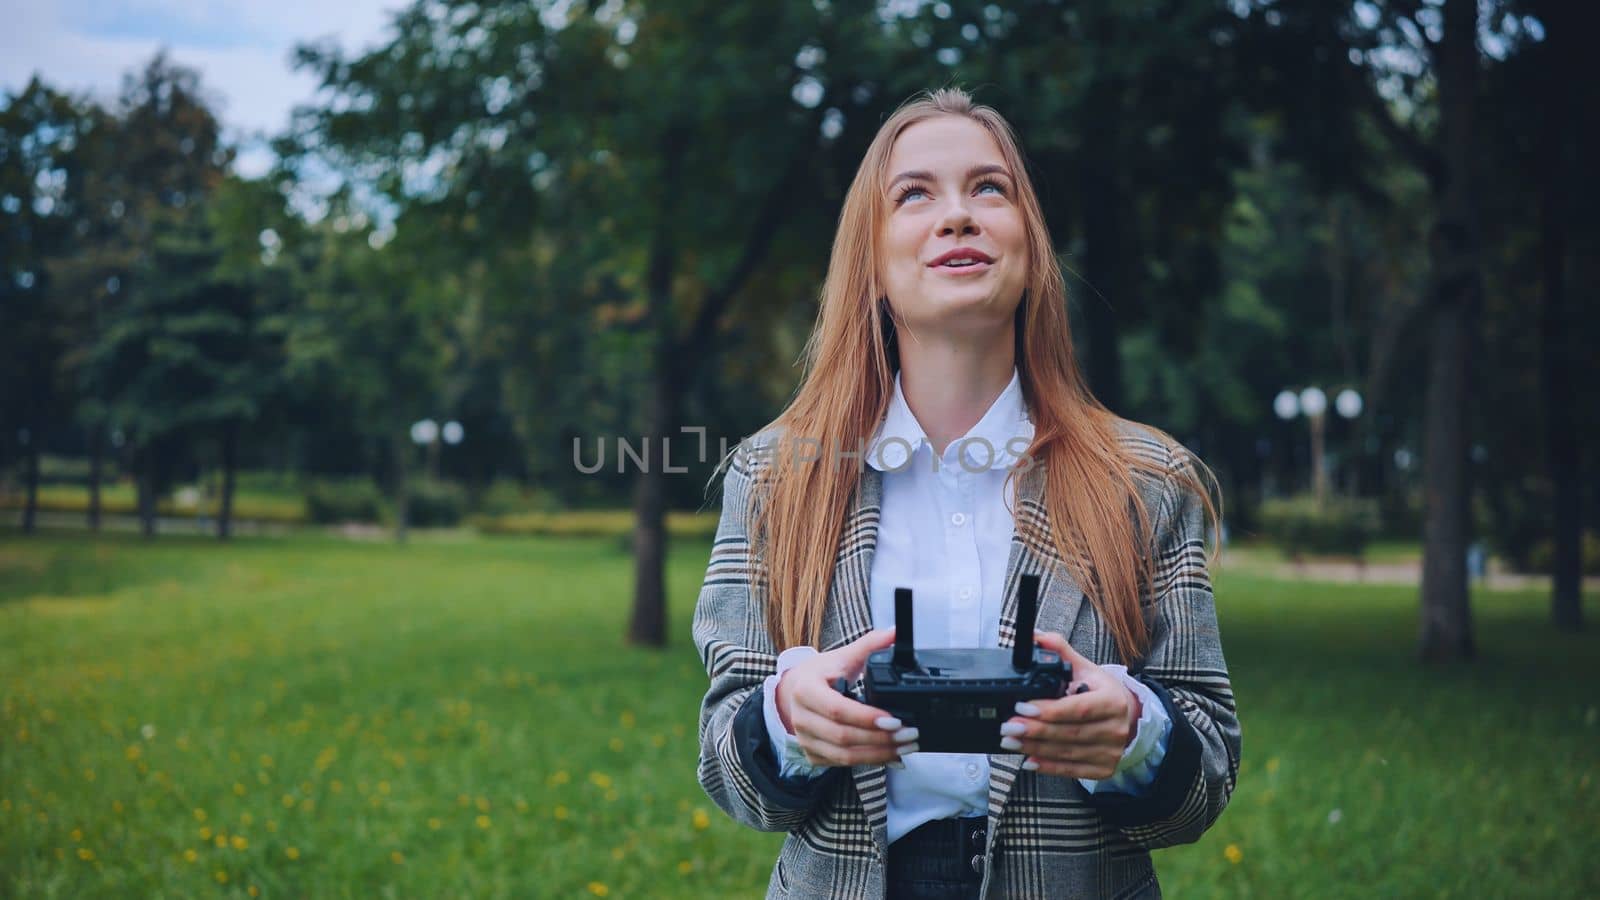 The girl controls the drone with the remote control in her hands